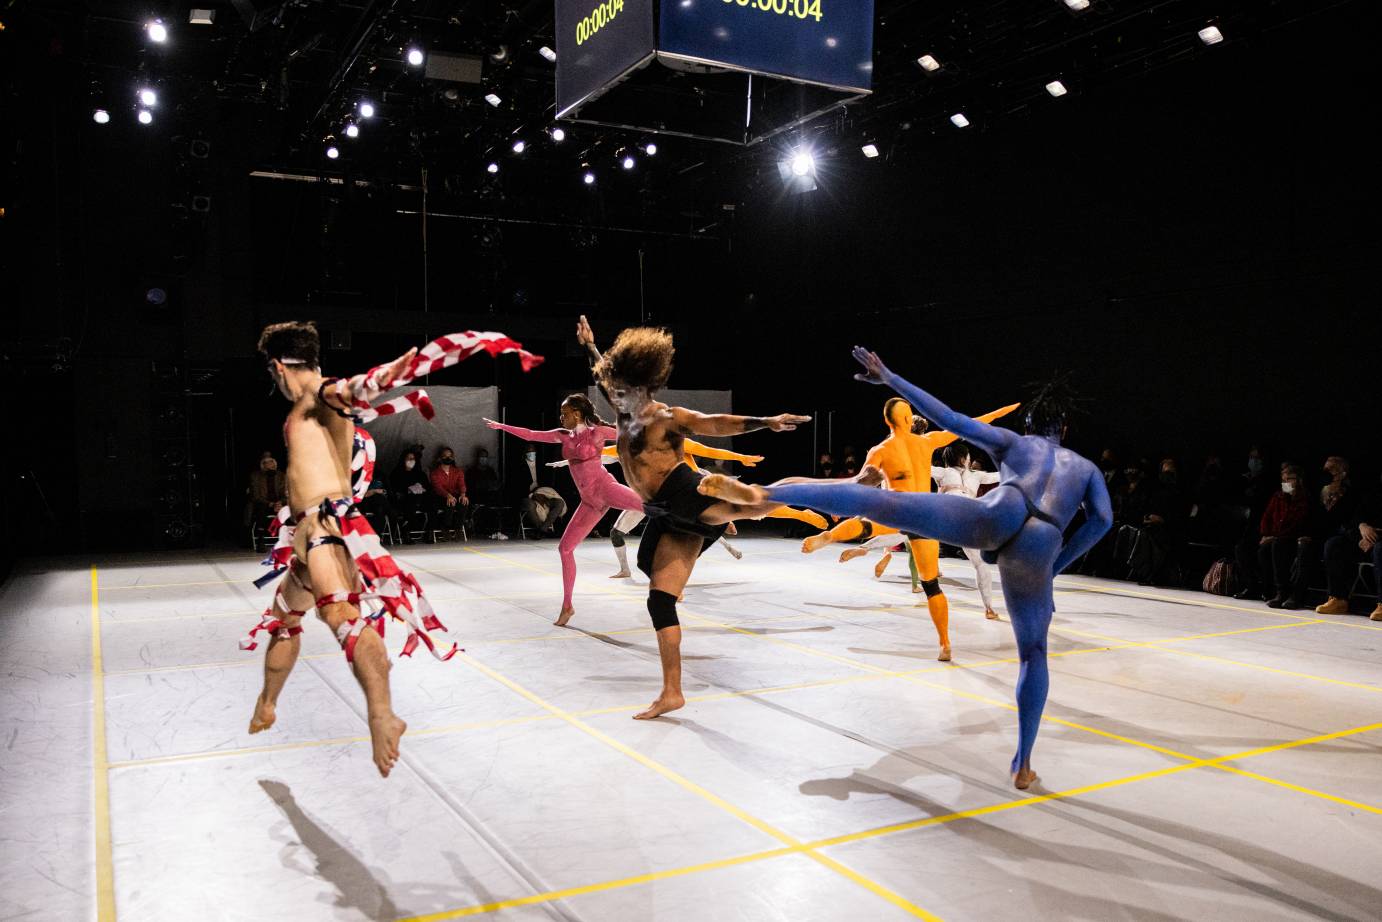 some painted dancers ( appearing nude because of the paint but wearing underclothes) and some dancers not painted but dressed in rags,one set a ripped American flag, jump and kick in the center of the stage and others not painted but dressed in